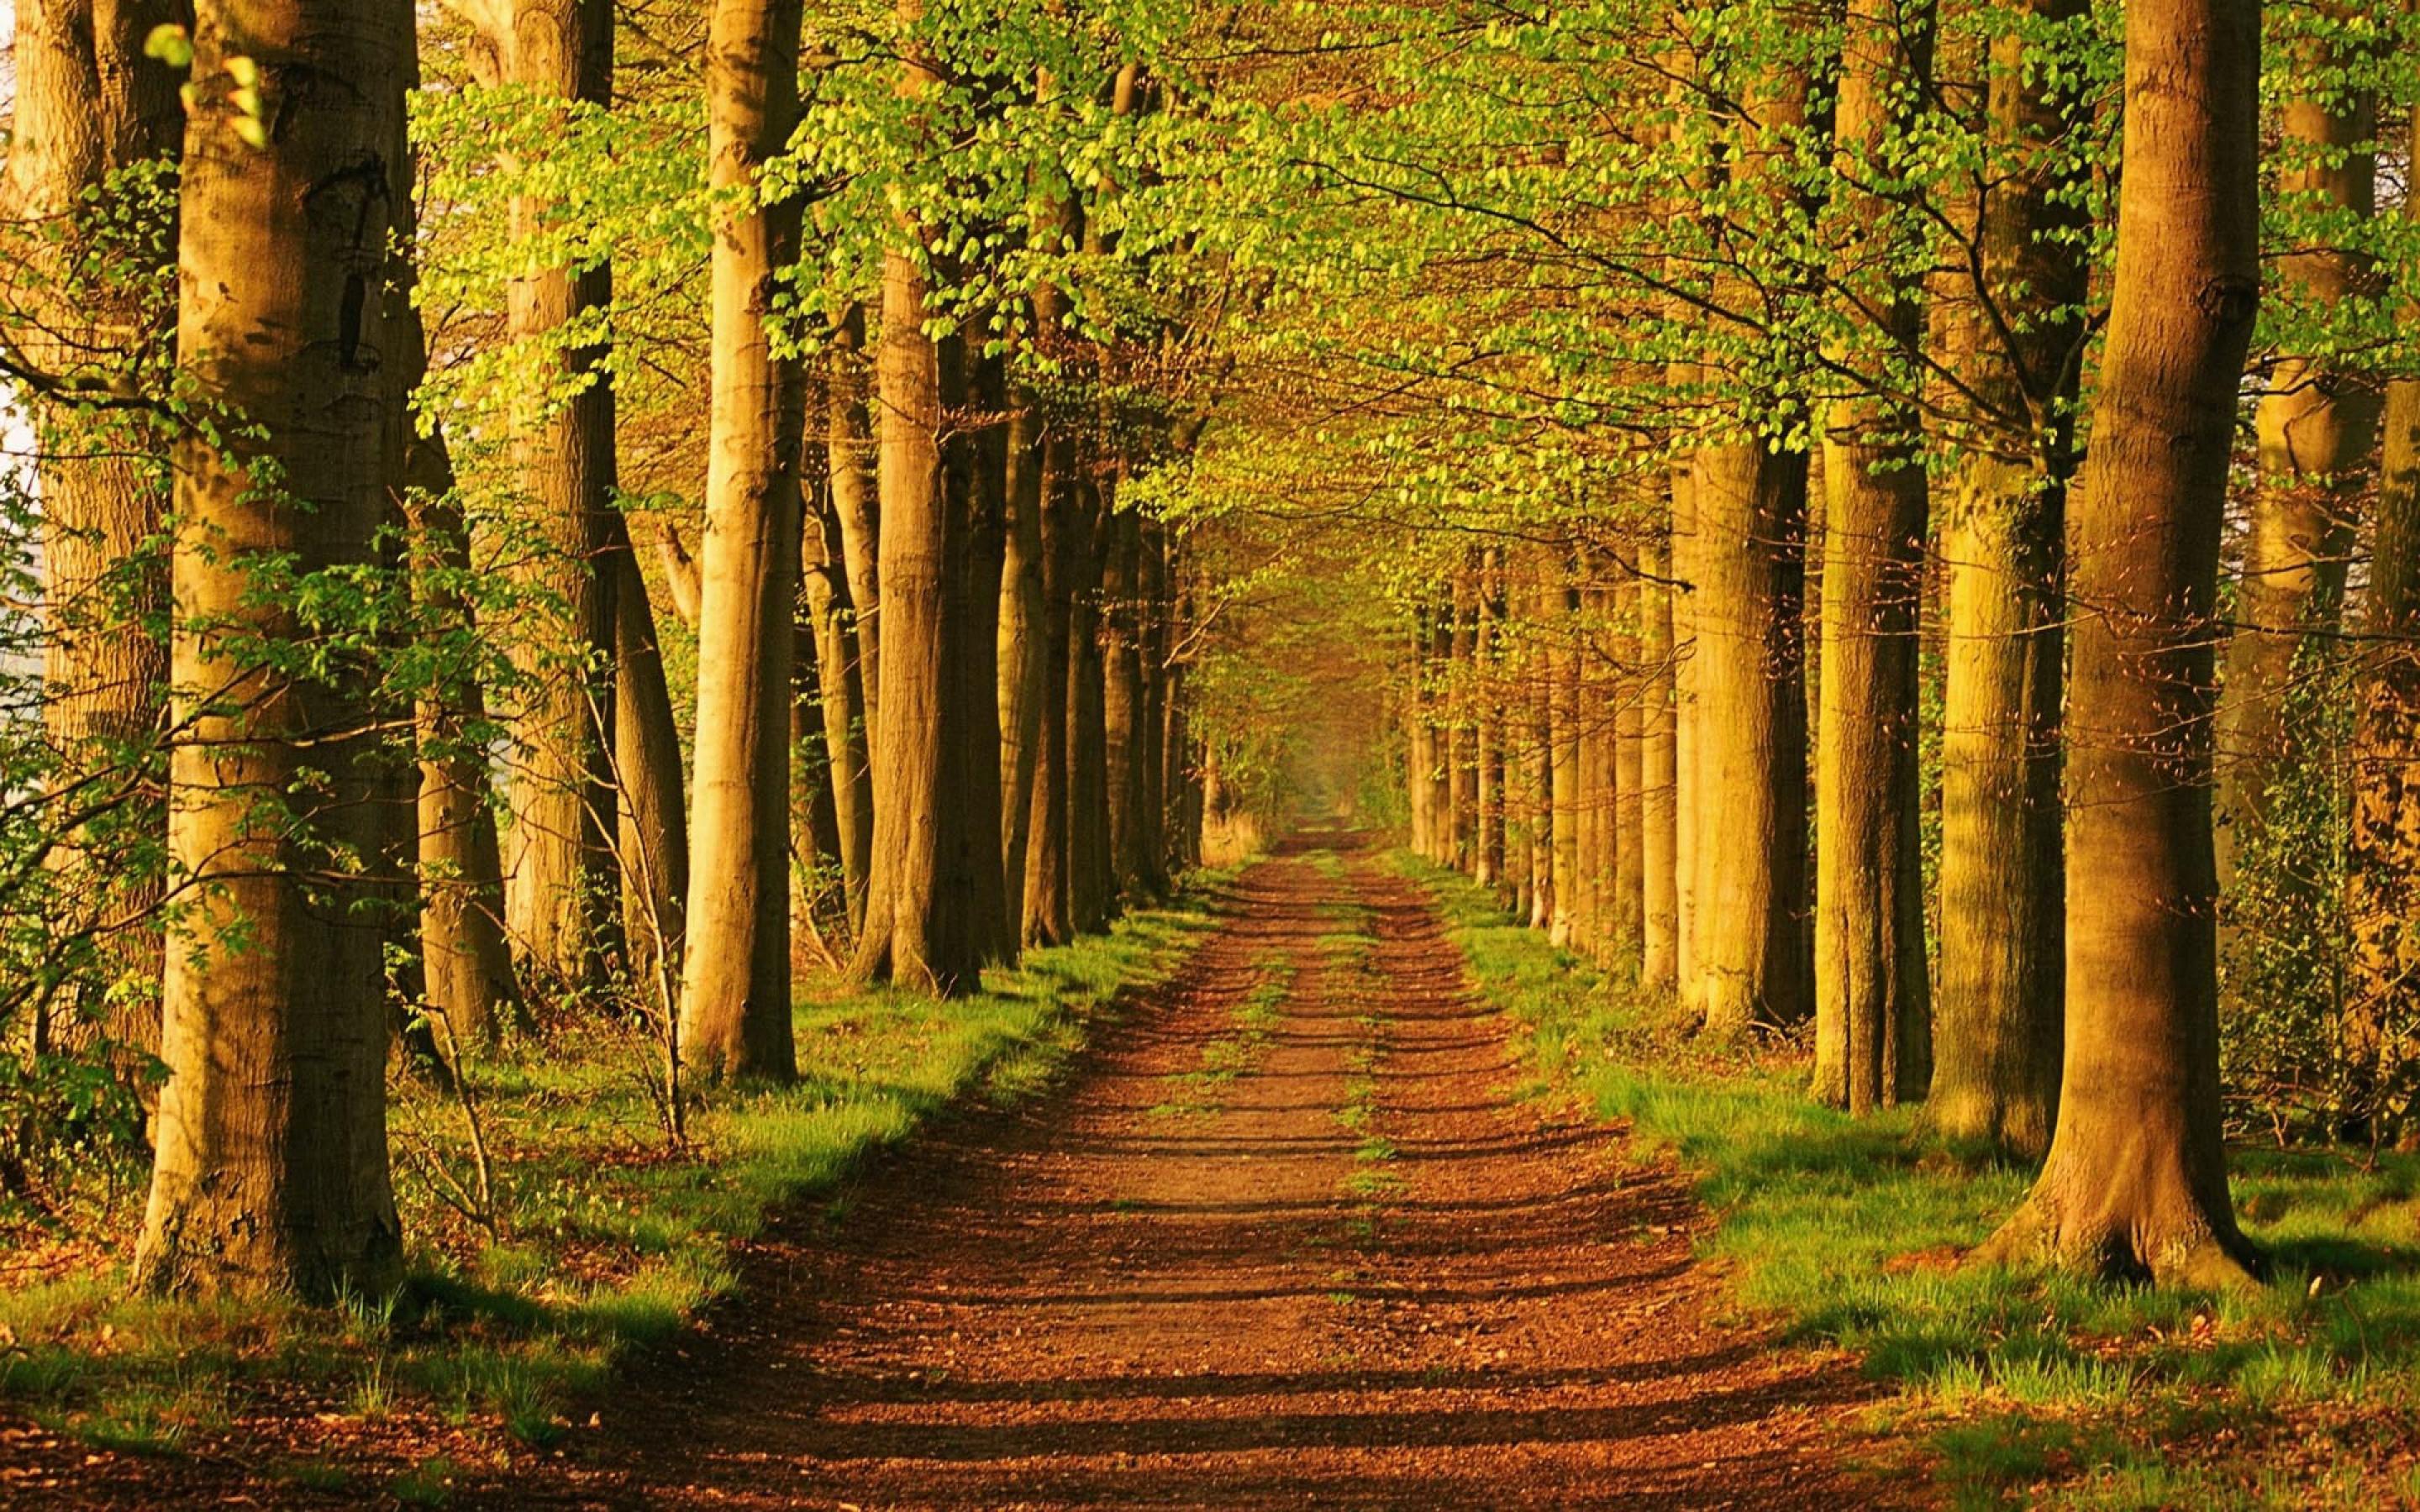 Forest Trail Landscape Wallpaper Gallery Yopriceville High Quality